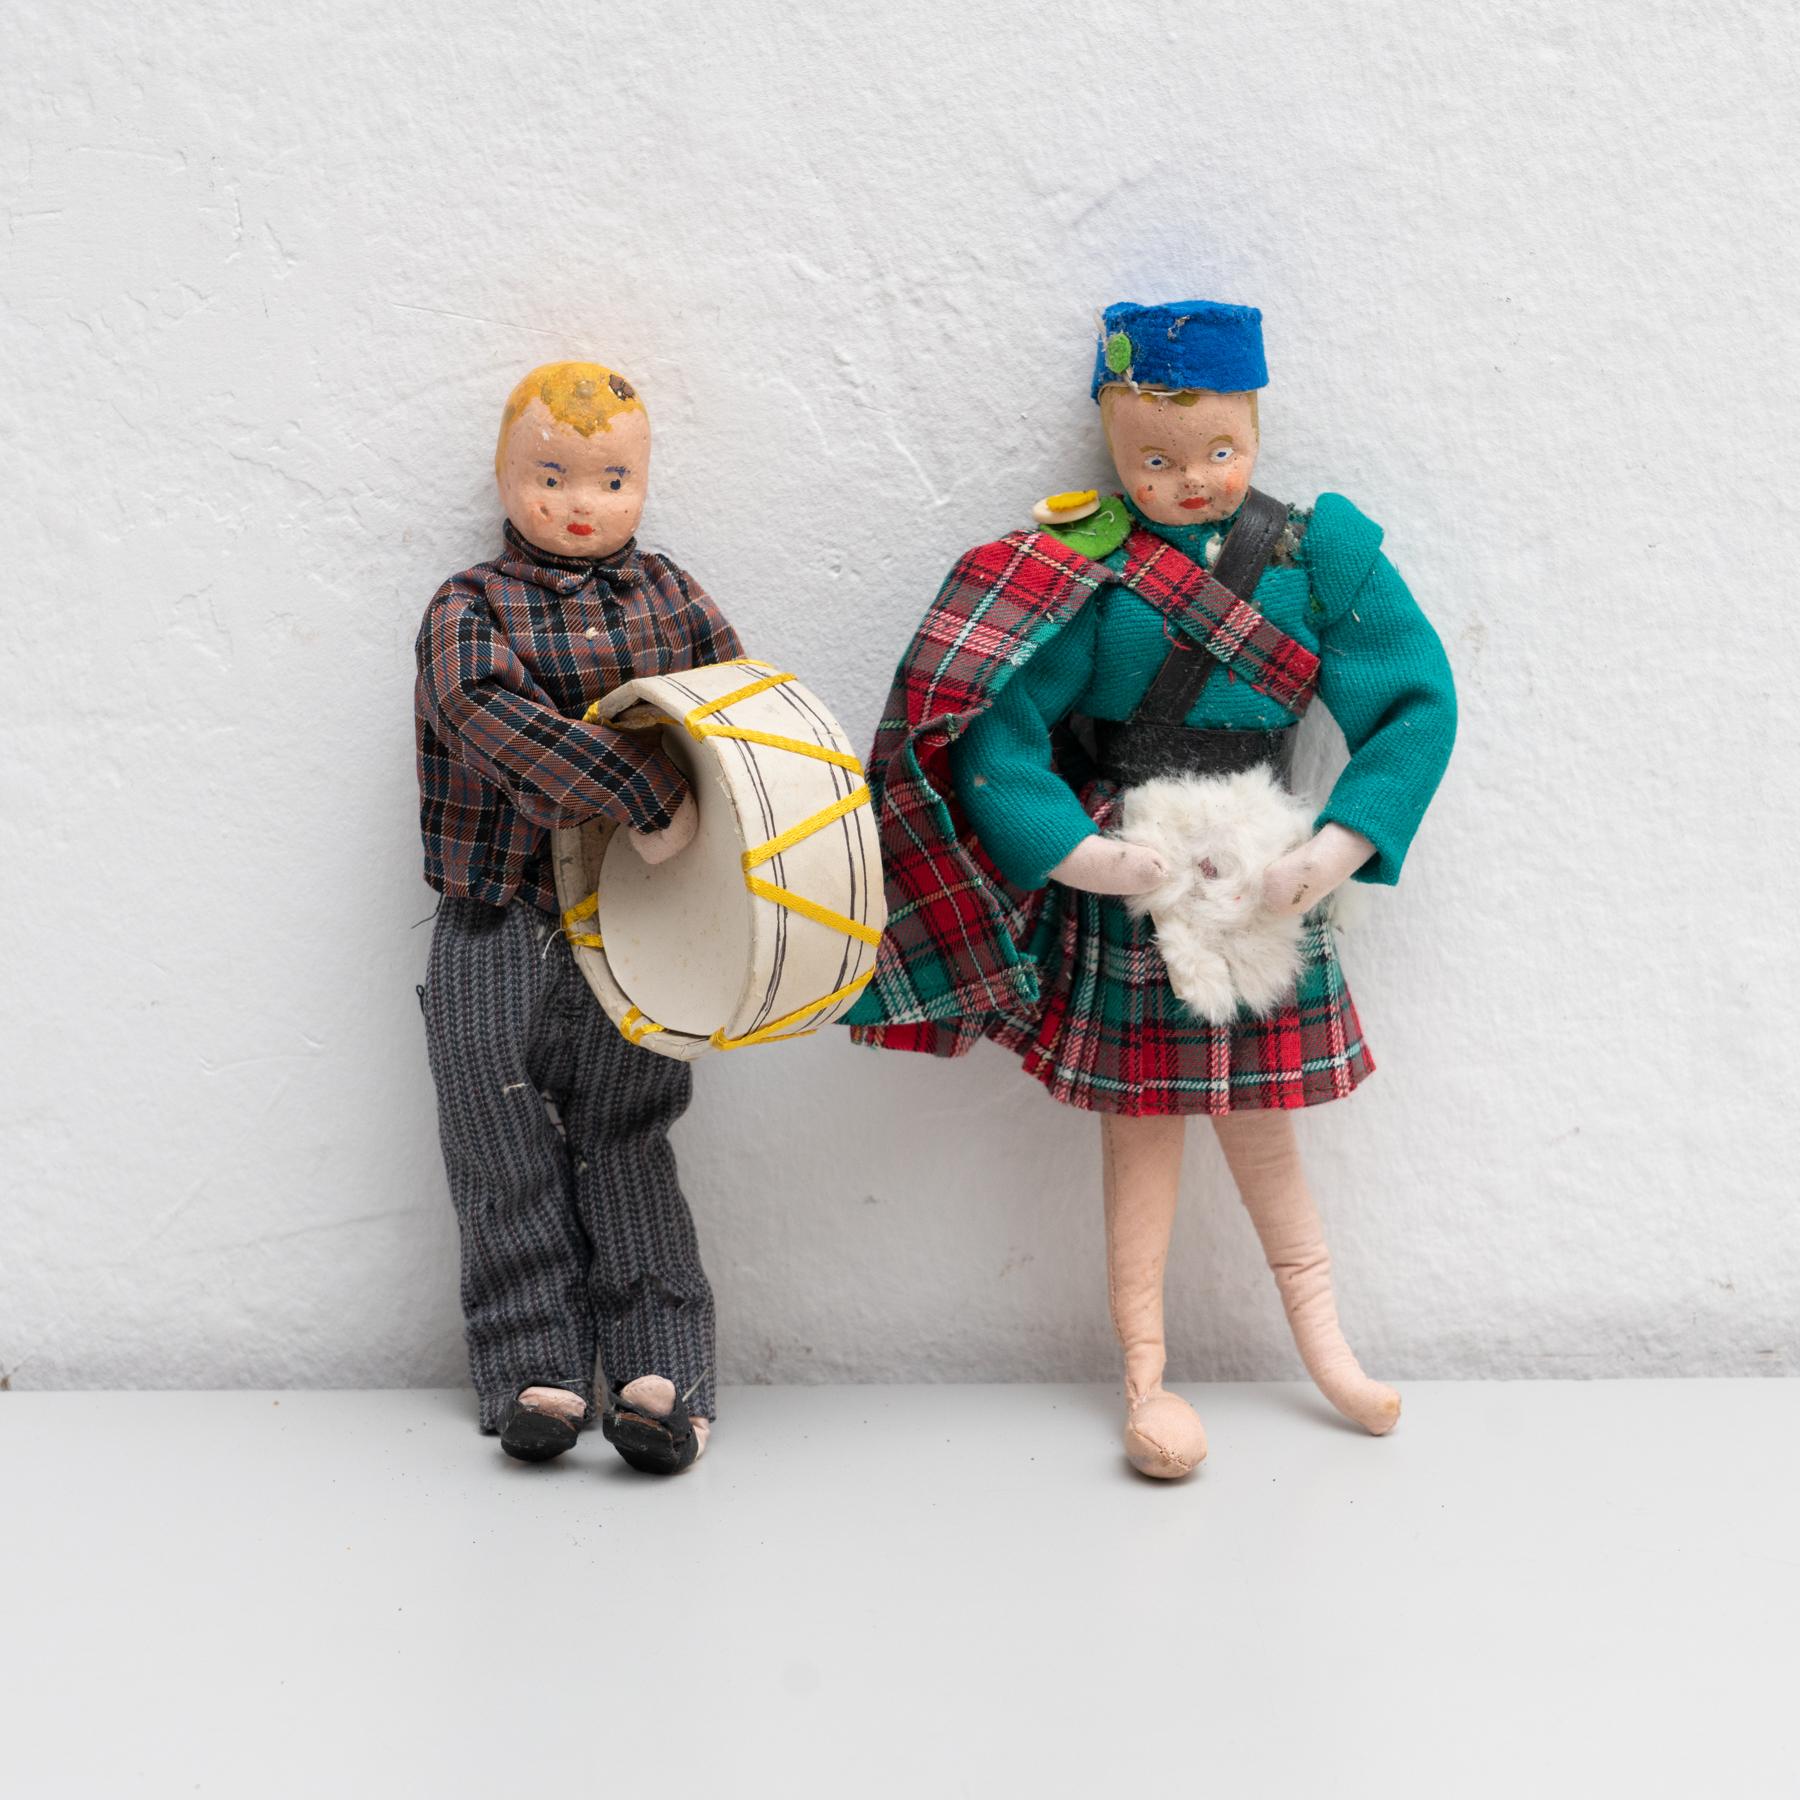 Antique early 20th century hand painted rag doll of two men dressed with folklore costumes. Both dolls present a quilted traditional Scottish garment.

Manufactured circa 1920 in Spain.

In original condition, with minor wear consistent with age